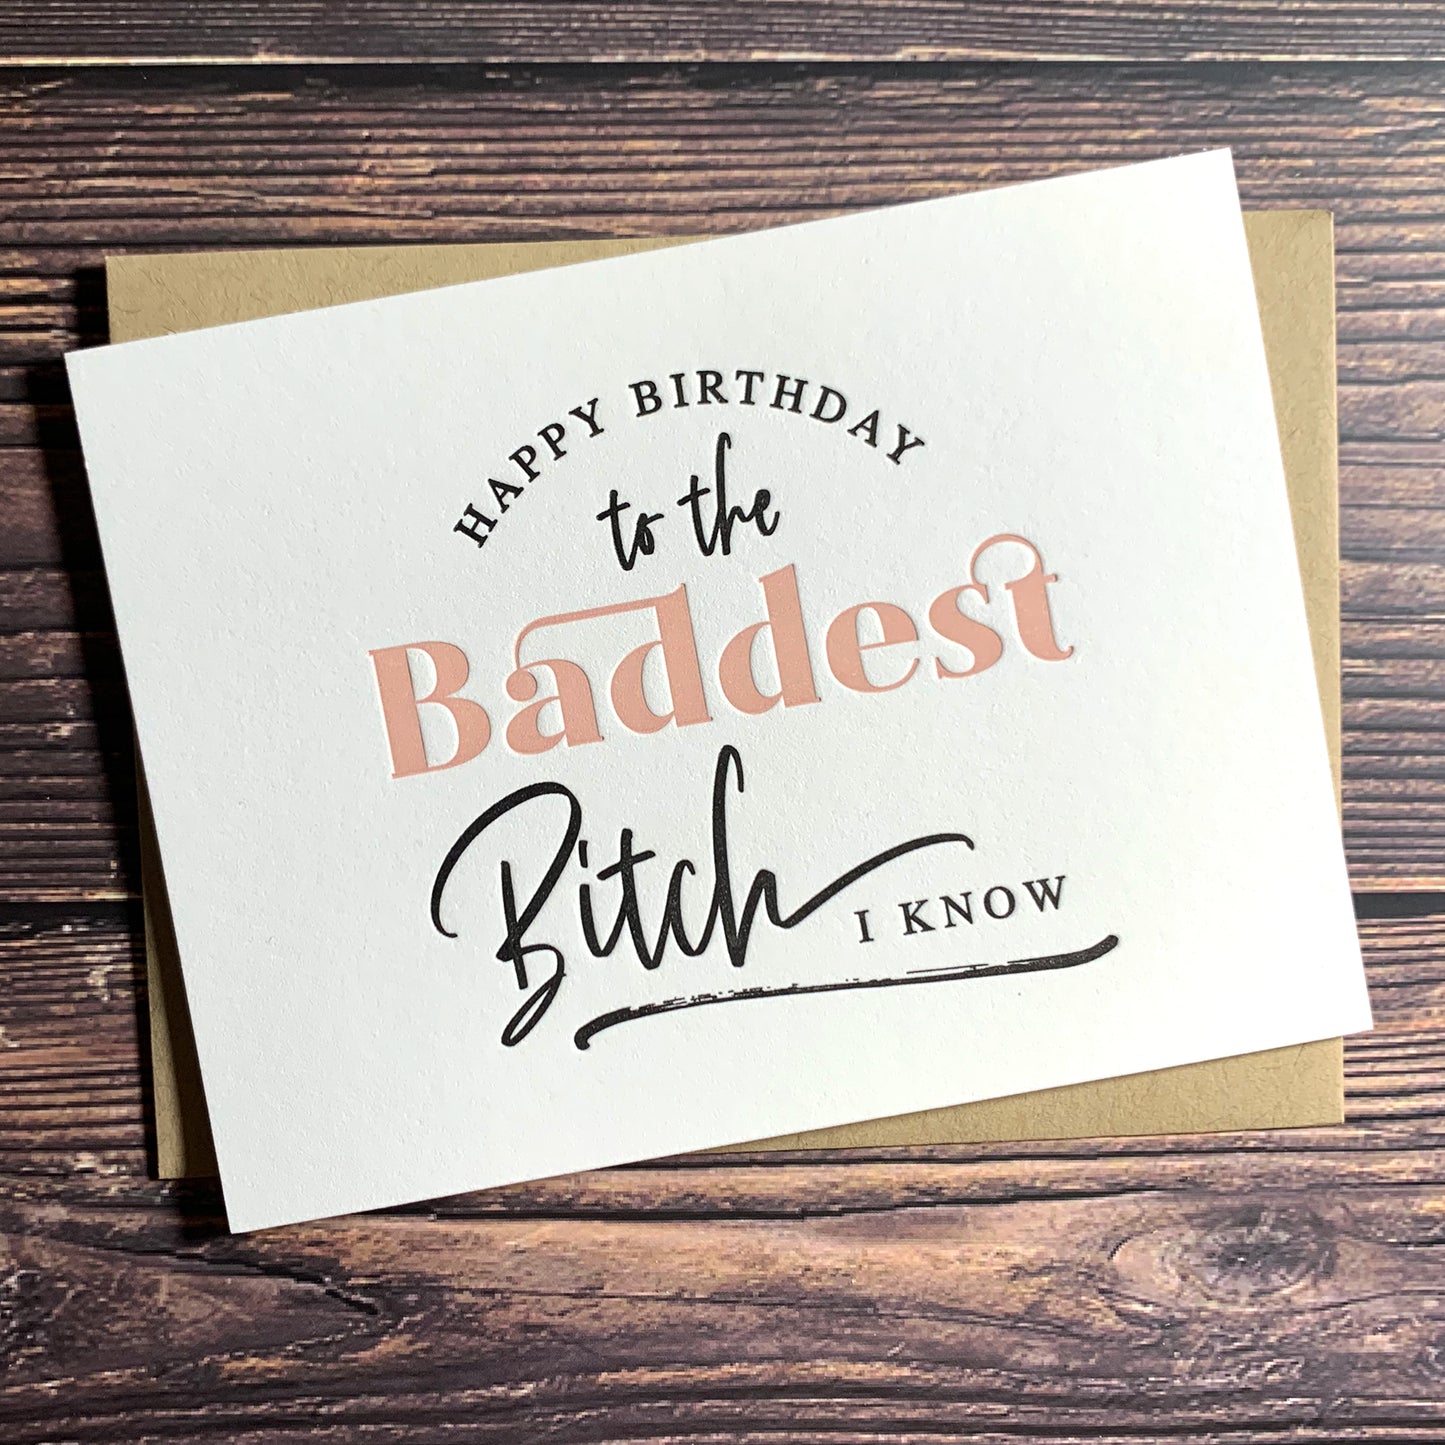 Happy Birthday to the Baddest Bitch I know, Birthday Card, Letterpress printed, includes envelope